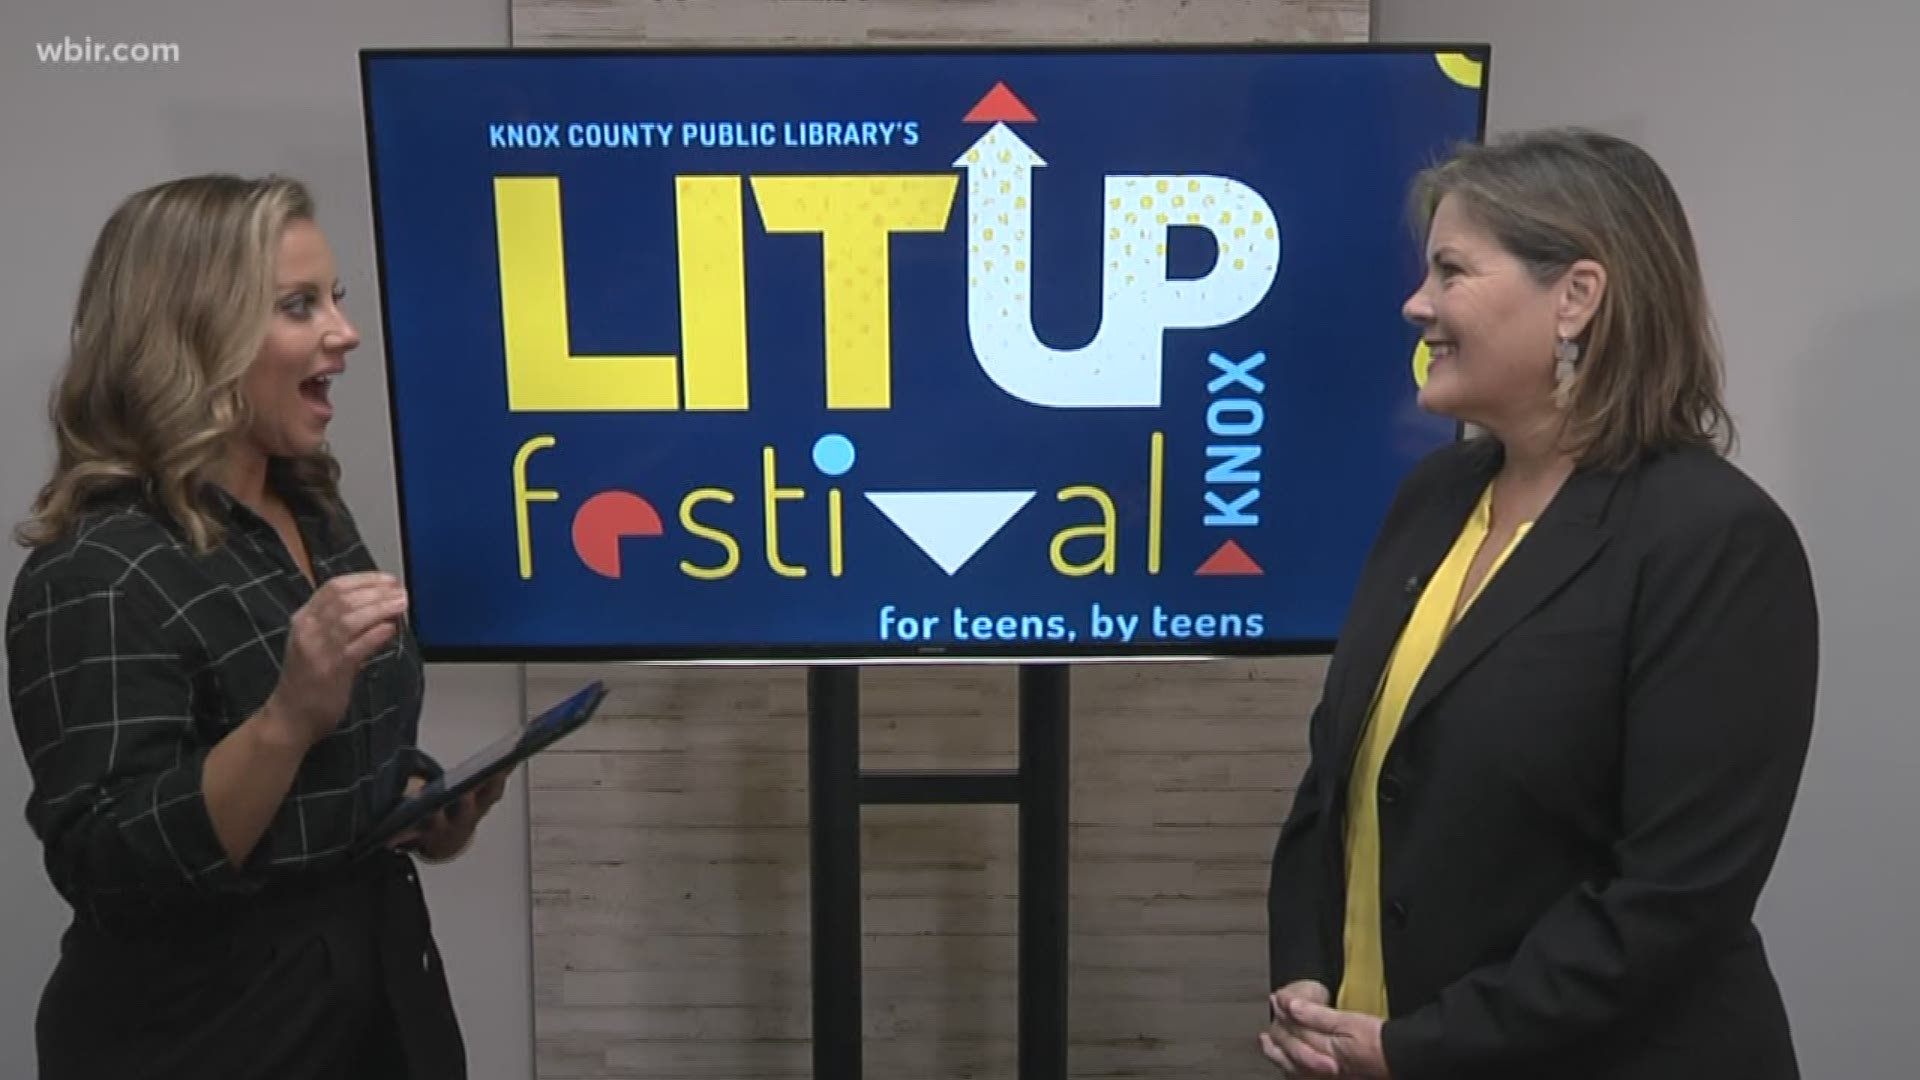 The Knox County Library will hold the LitUp Festival in downtown Knoxville in Market Square on Sunday, October 13, 2019.